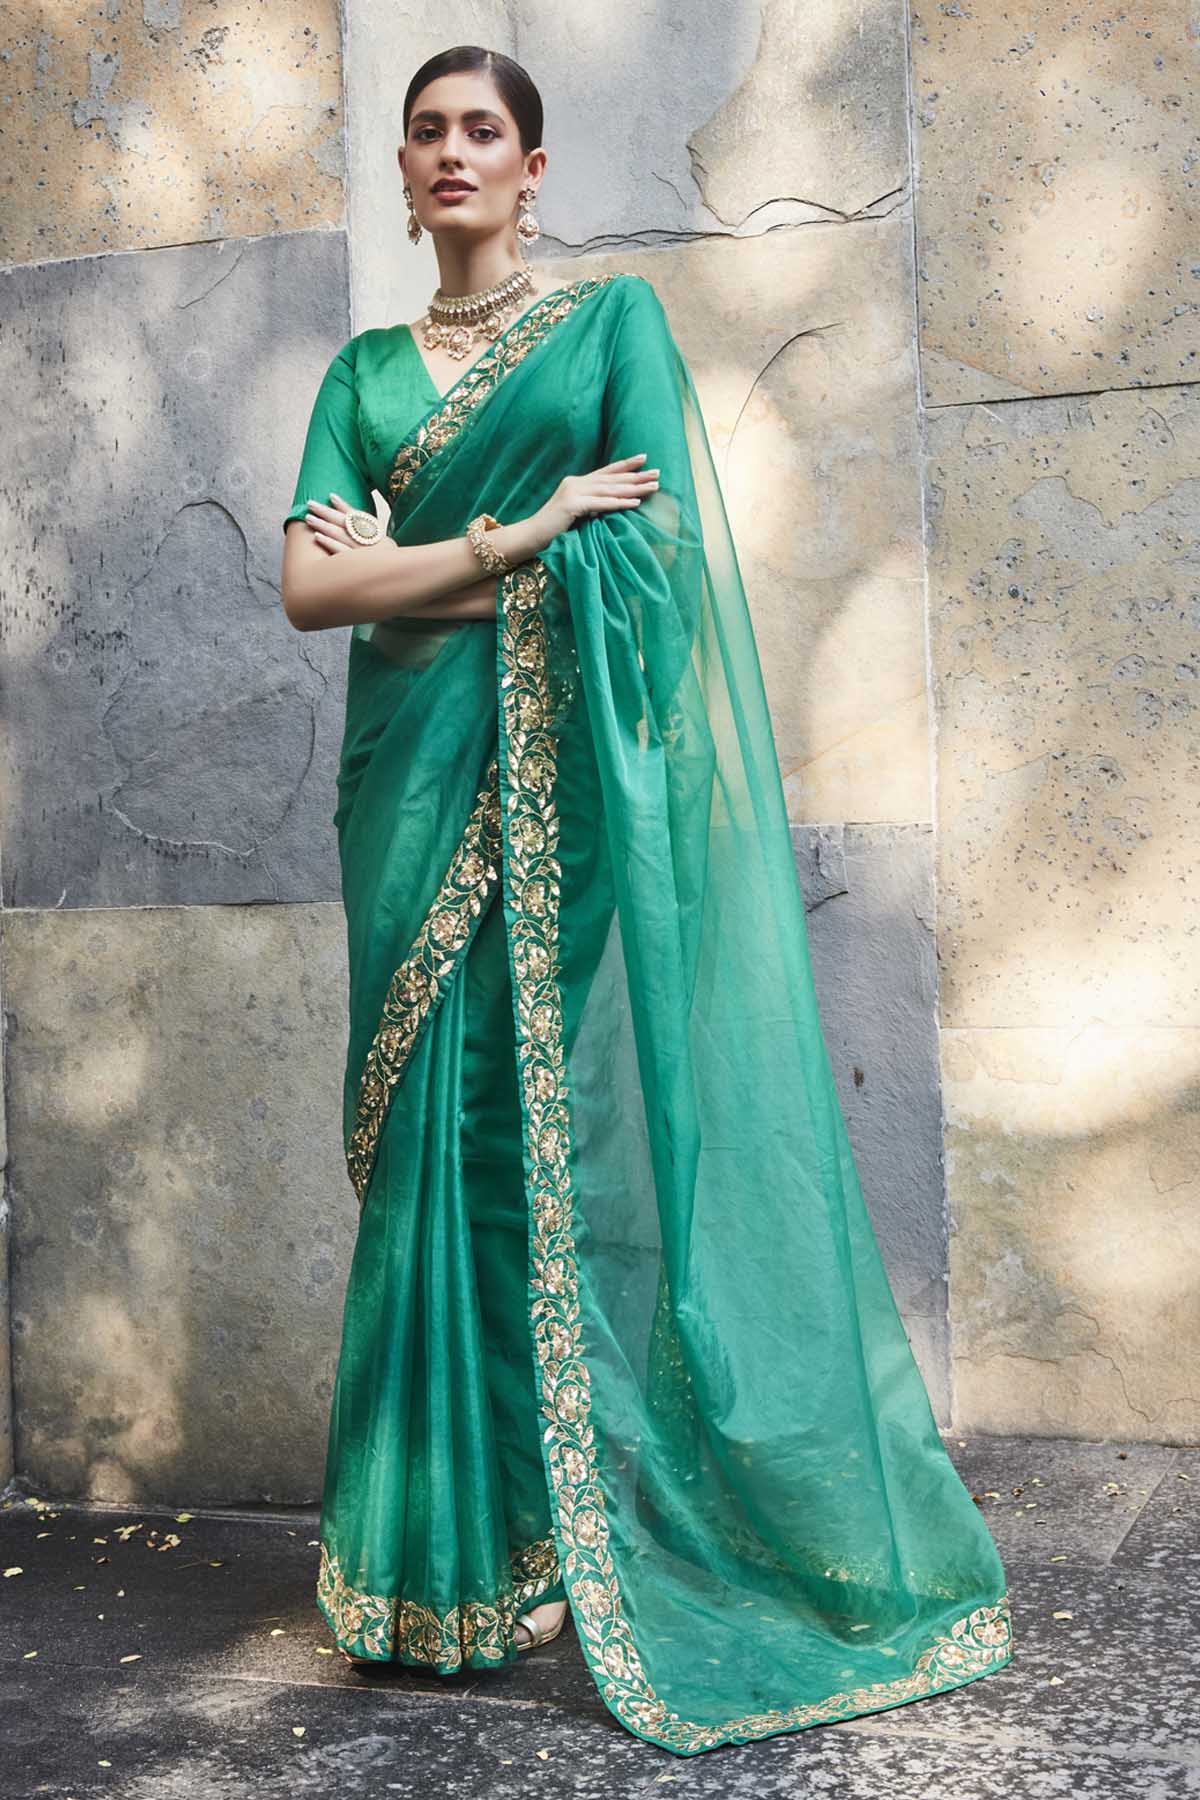 Designer Ranian Green silk organza saree with delicate floral pattern border in 3D sequins and zari. The saree comes with a plain satin silk blouse with a back hook For women Online at ScrollnShops